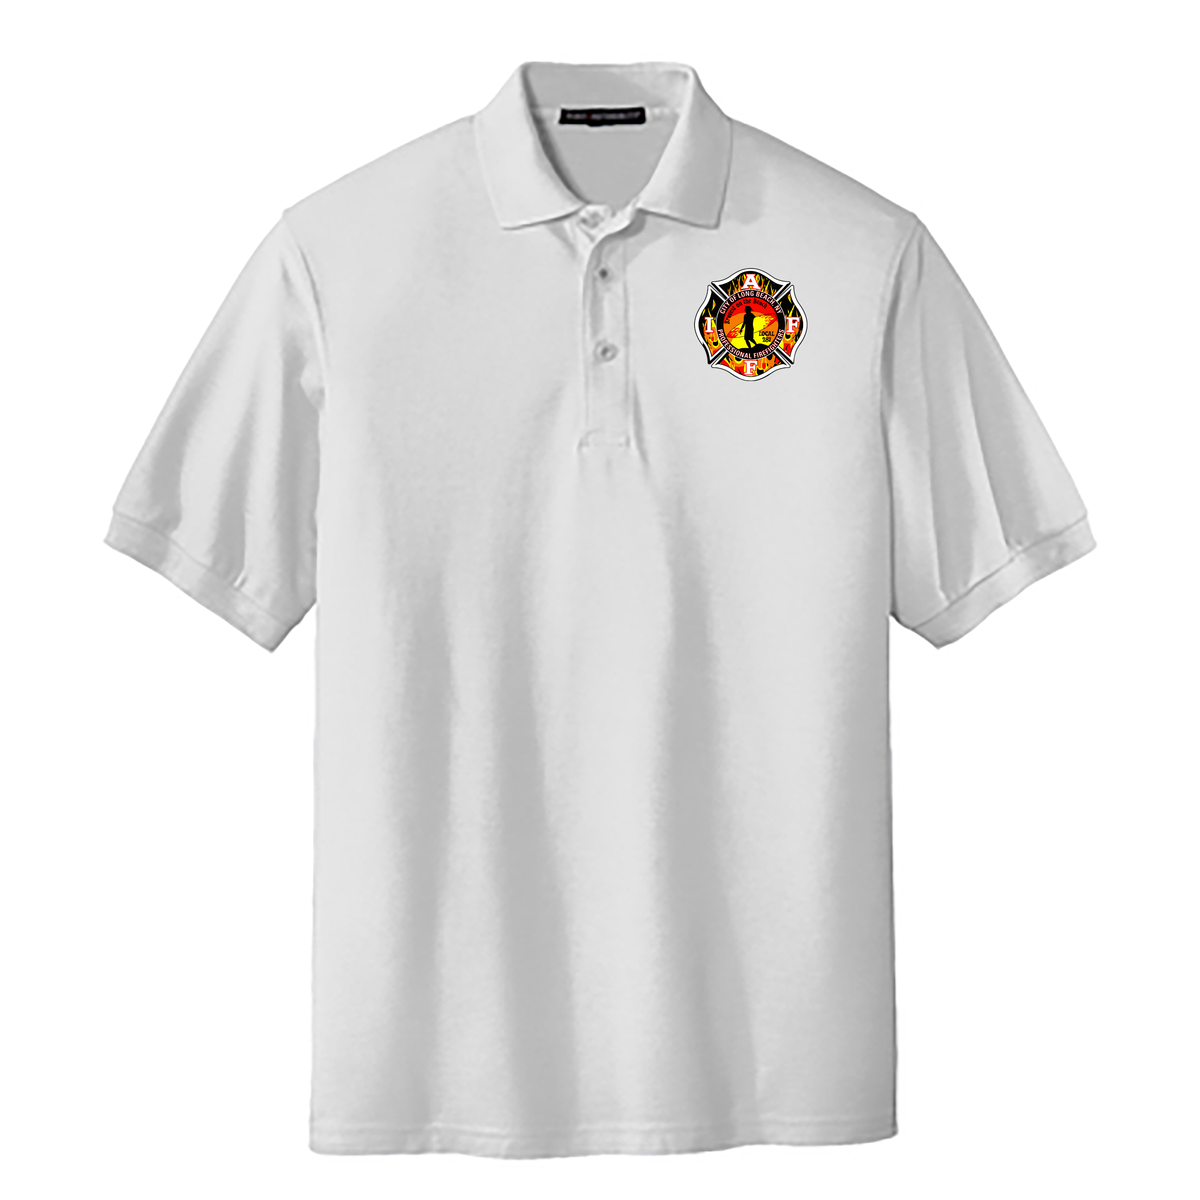 Long Beach Professional Firefighters Silk Touch Polo